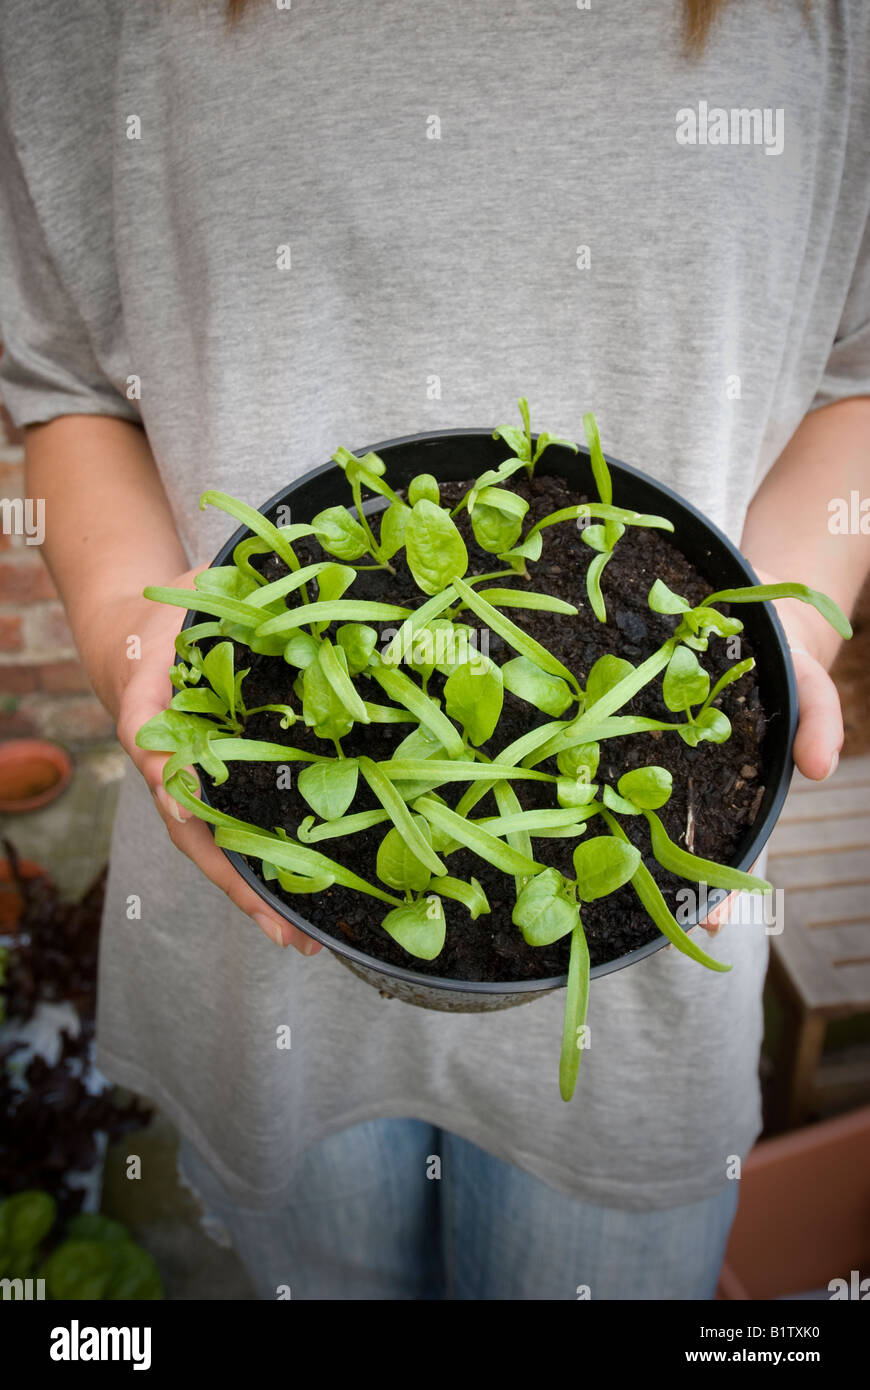 spinach seedlings growing in a pot held by a young woman wearing a Grey t shirt Stock Photo